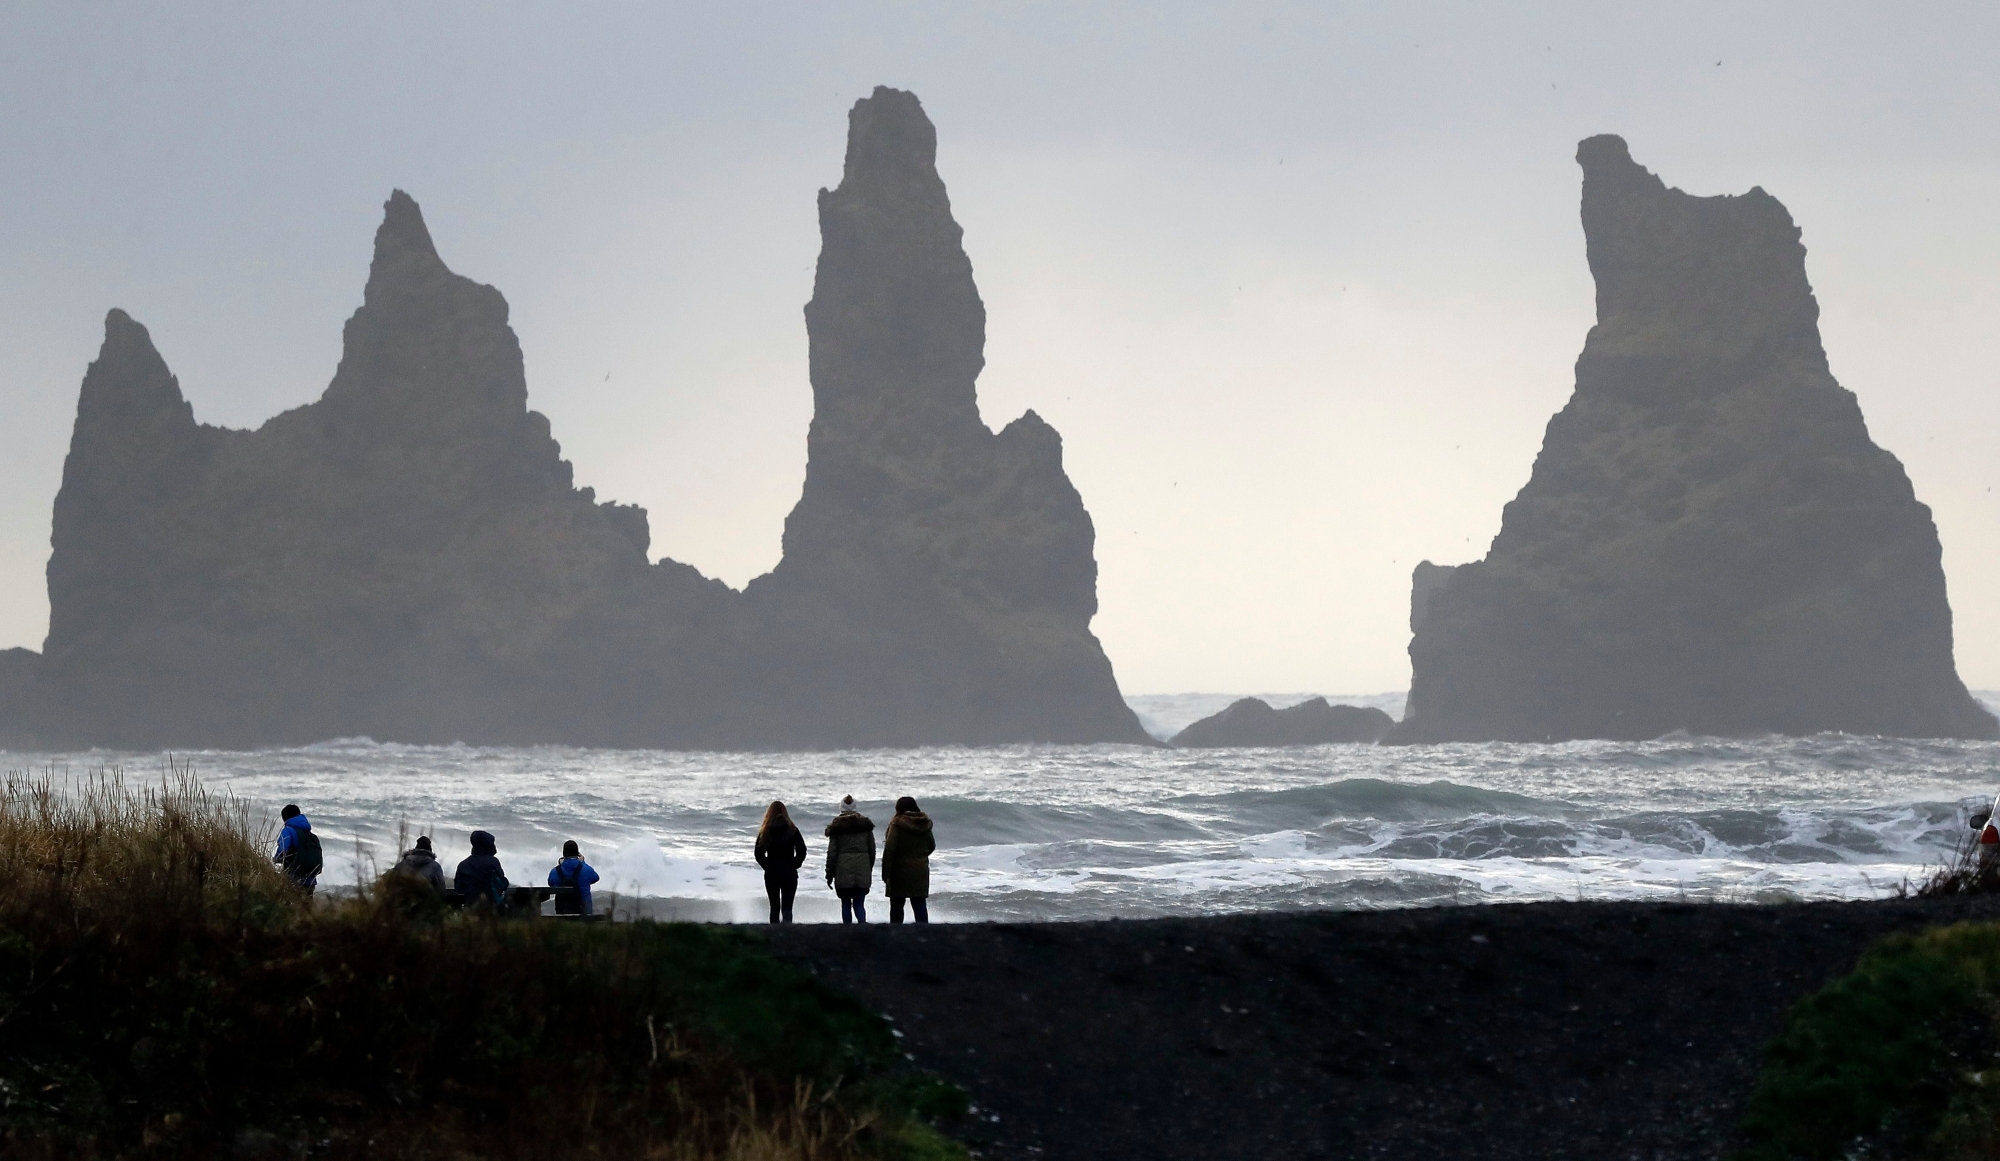 People walk on the black sanded beach in Vik, Iceland, near the Volcano Katla, Wednesday, Oct. 26, 2016. Katla Volcano has helped turn sleepy Vik, a community of 300 people some 110 miles (180 kilometers) east of the capital, Reykjavik, into a tourism hotspot. (AP Photo/Frank Augstein) ICELAND UNDER THE VOLCANO